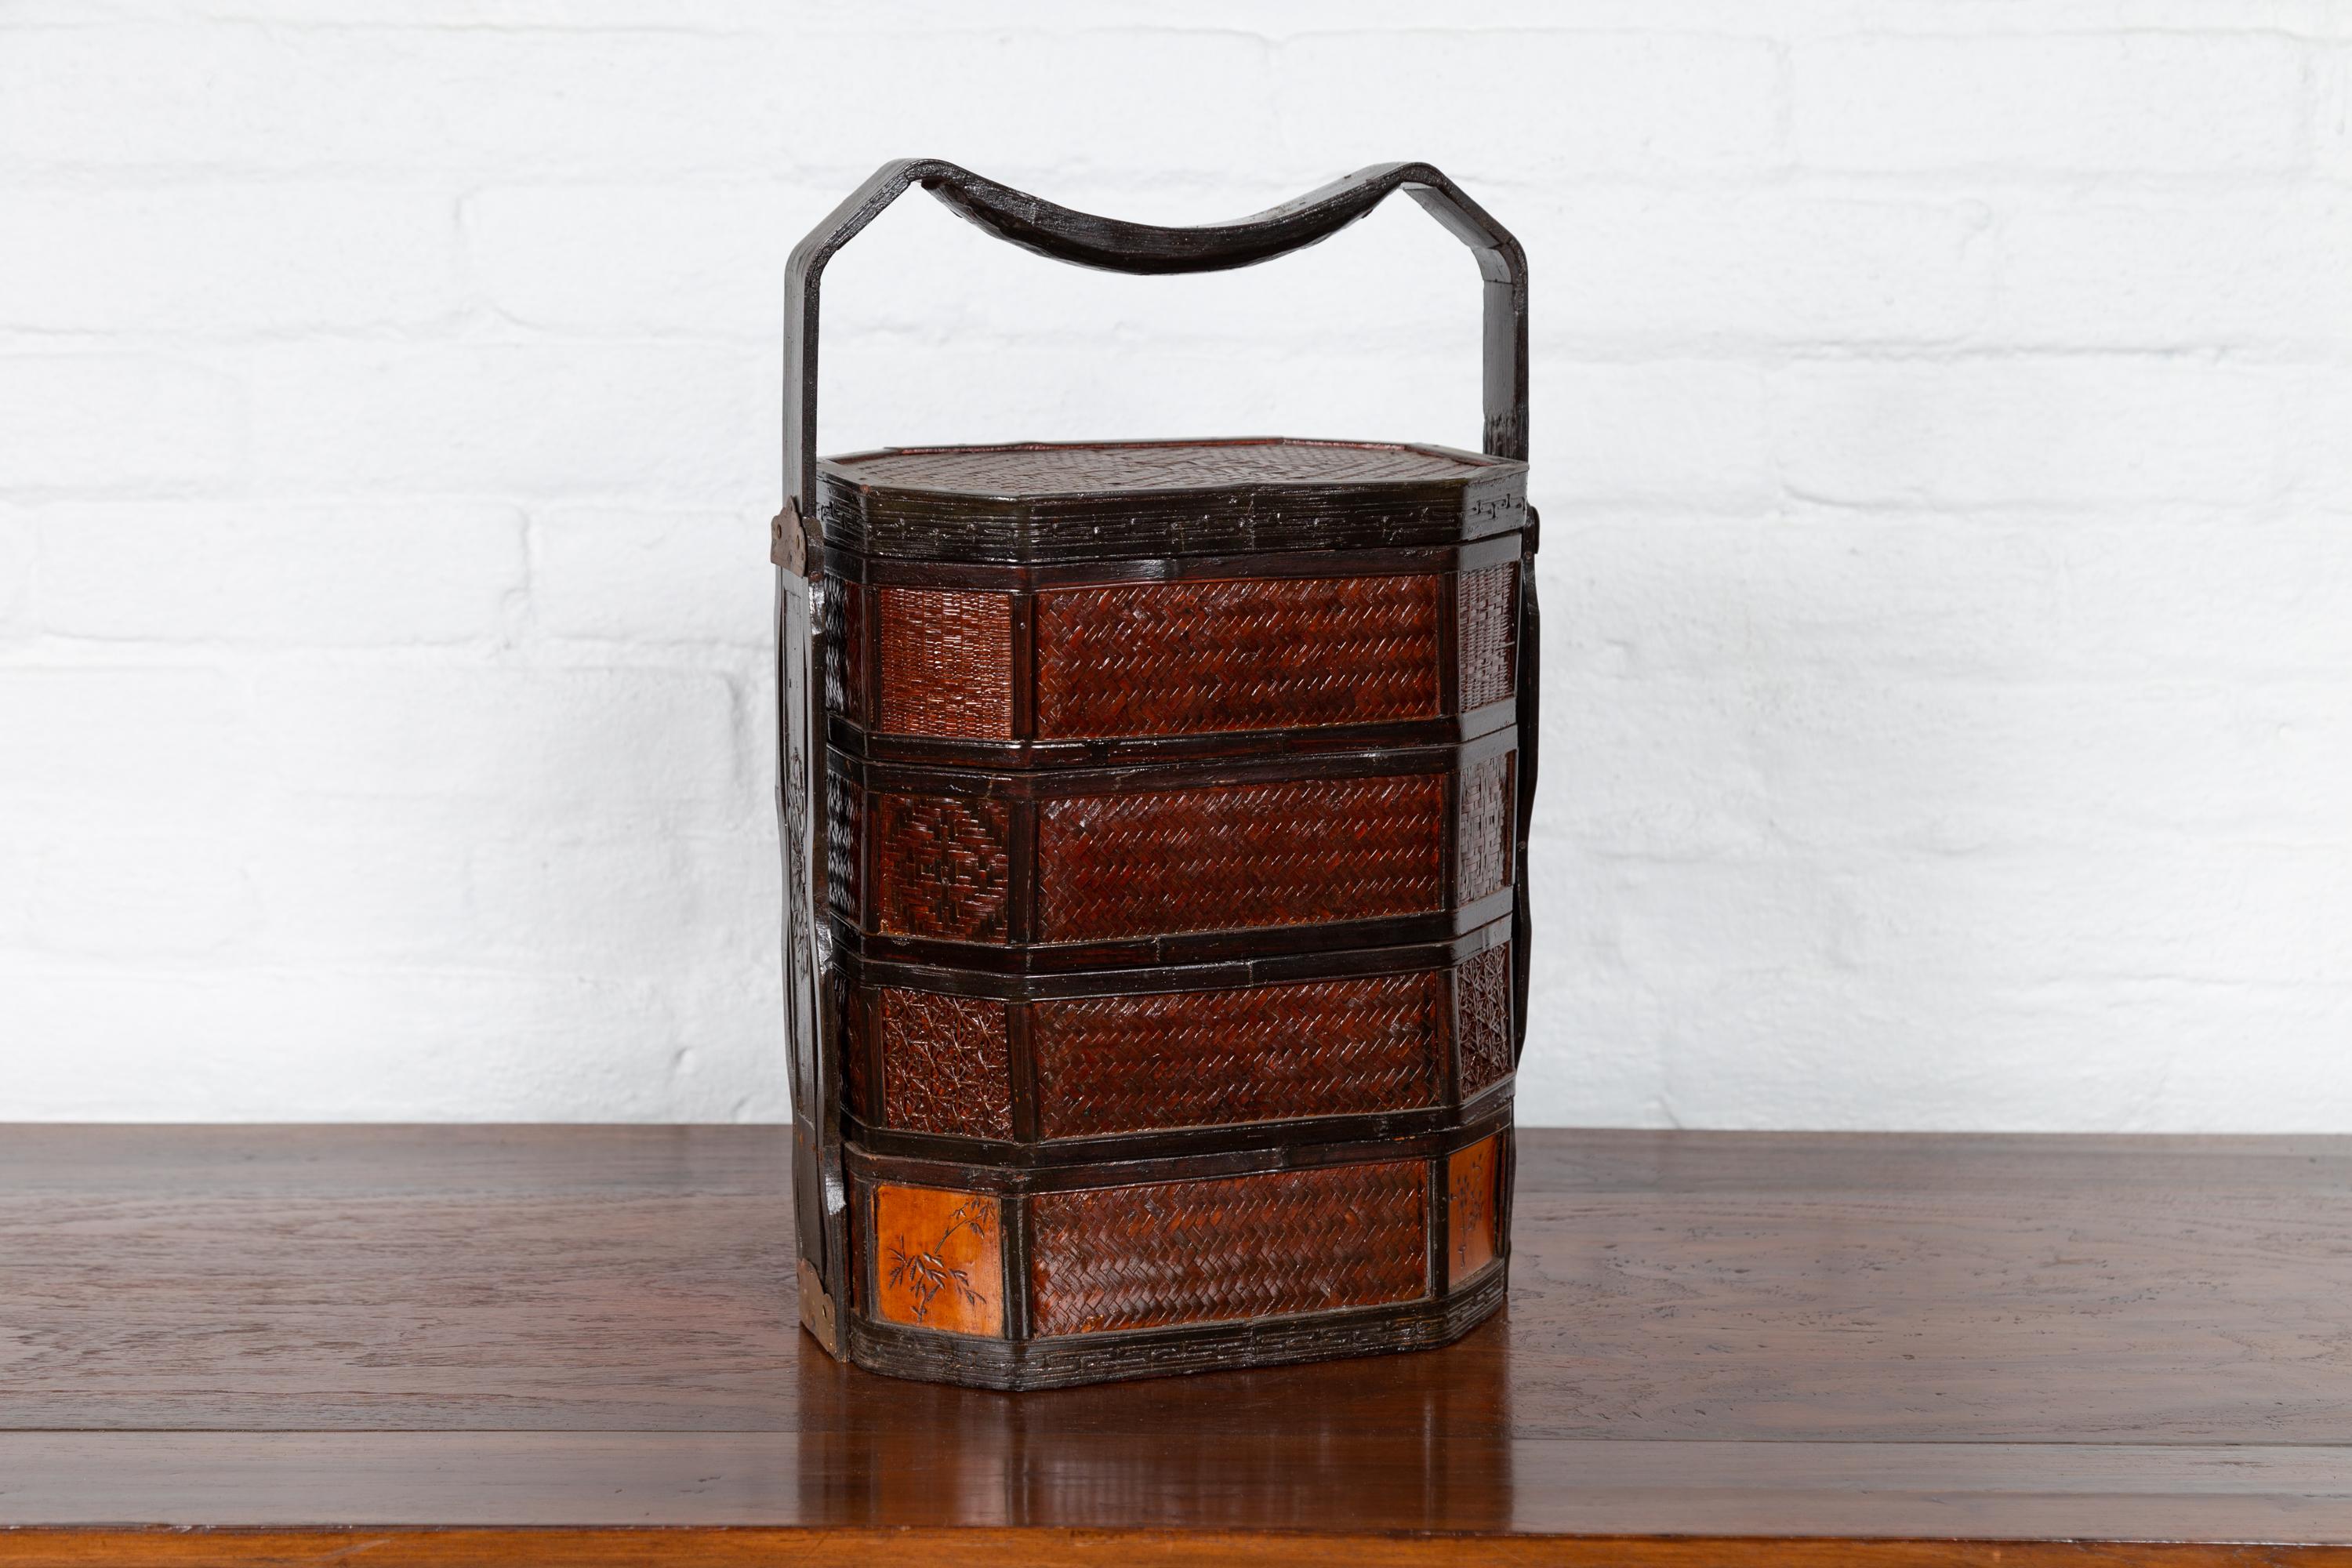 20th Century Small Burmese Vintage Stacking Picnic Basket with Lacquered Accents and Handle